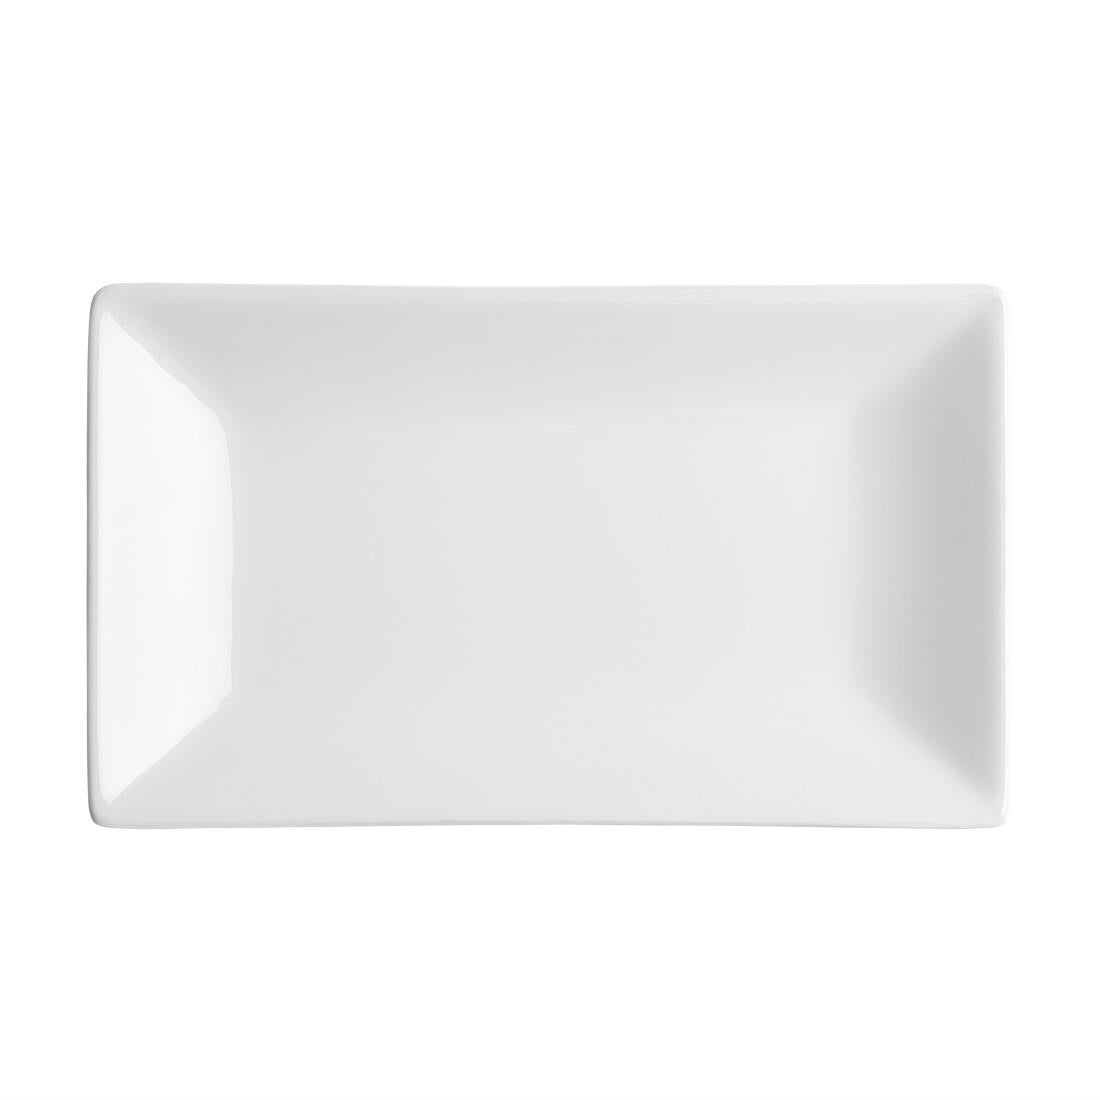 CC894 Olympia Serving Rectangular Platters 250x 150mm (Pack of 4)